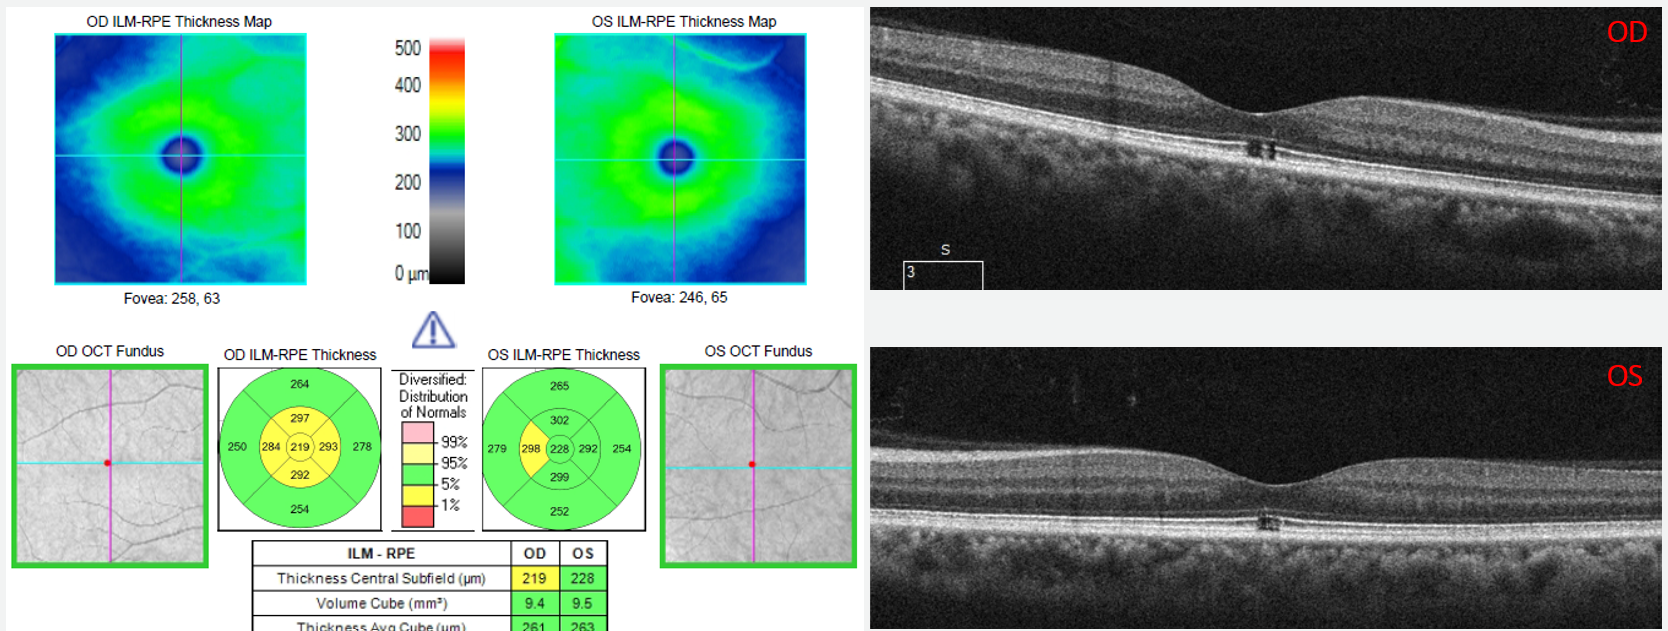 This case highlights the importance of always reviewing the B-scans in relation to the macular thickness maps on the diagnostic report.  The B-scan image clearly shows outer retinal loss without traction